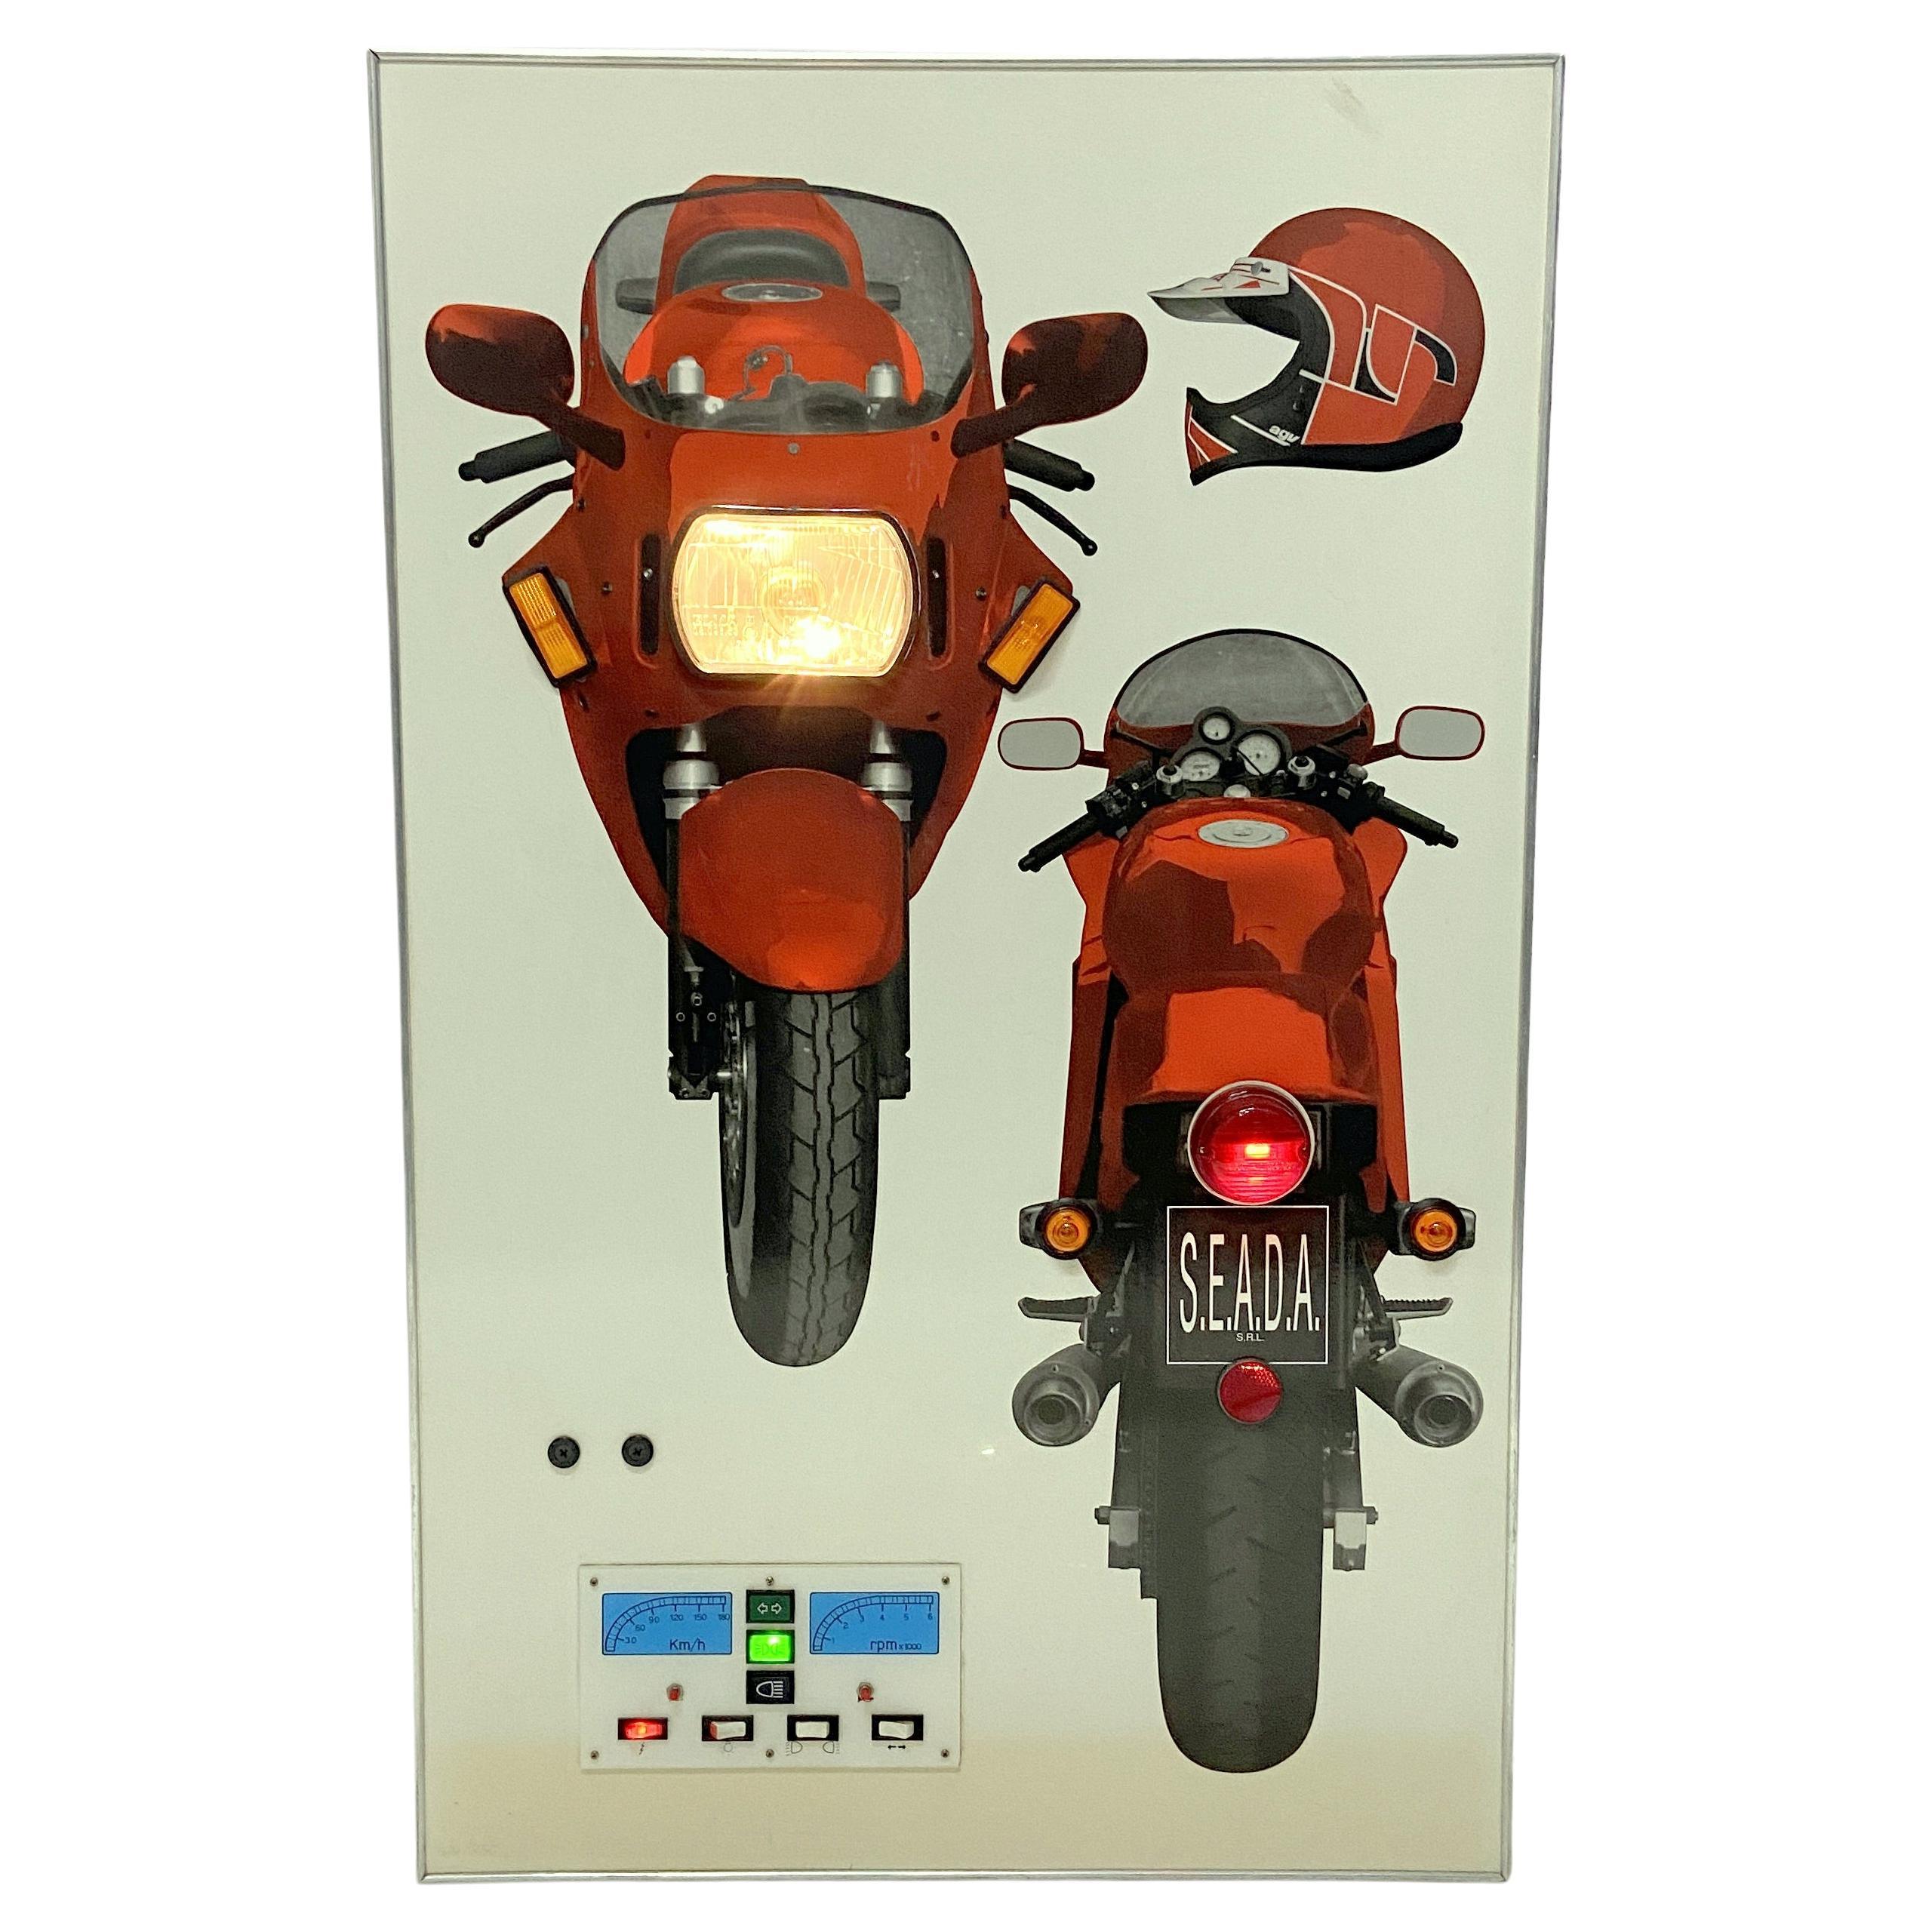 Wall Mounted Artwork with Motorbike Demonstrating Lights for Driving Instruction